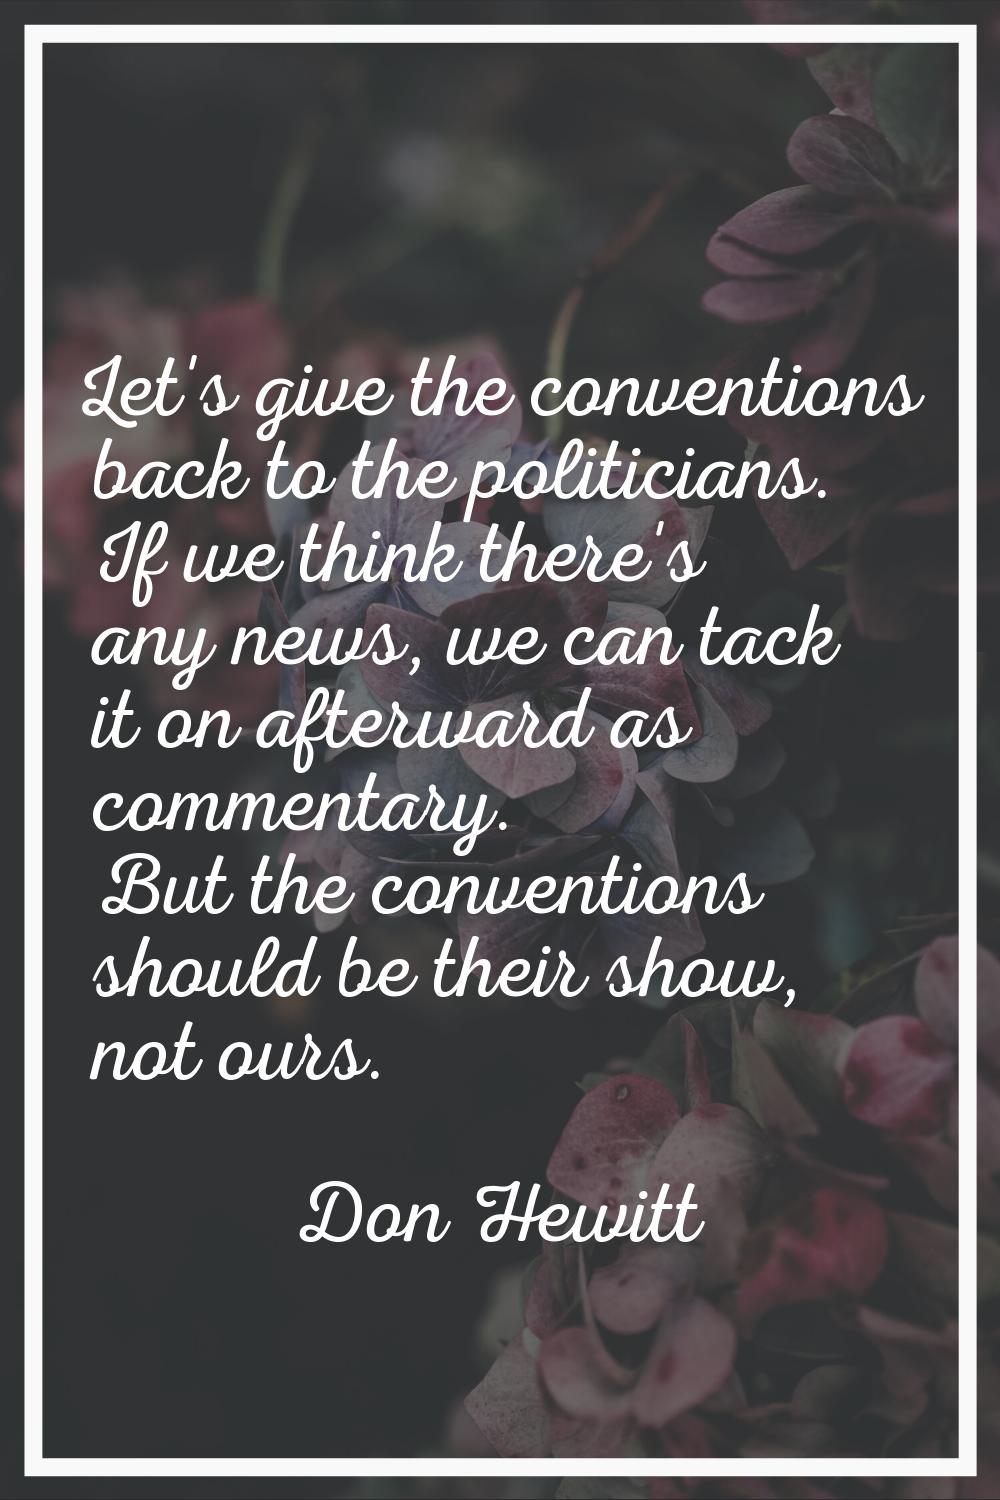 Let's give the conventions back to the politicians. If we think there's any news, we can tack it on